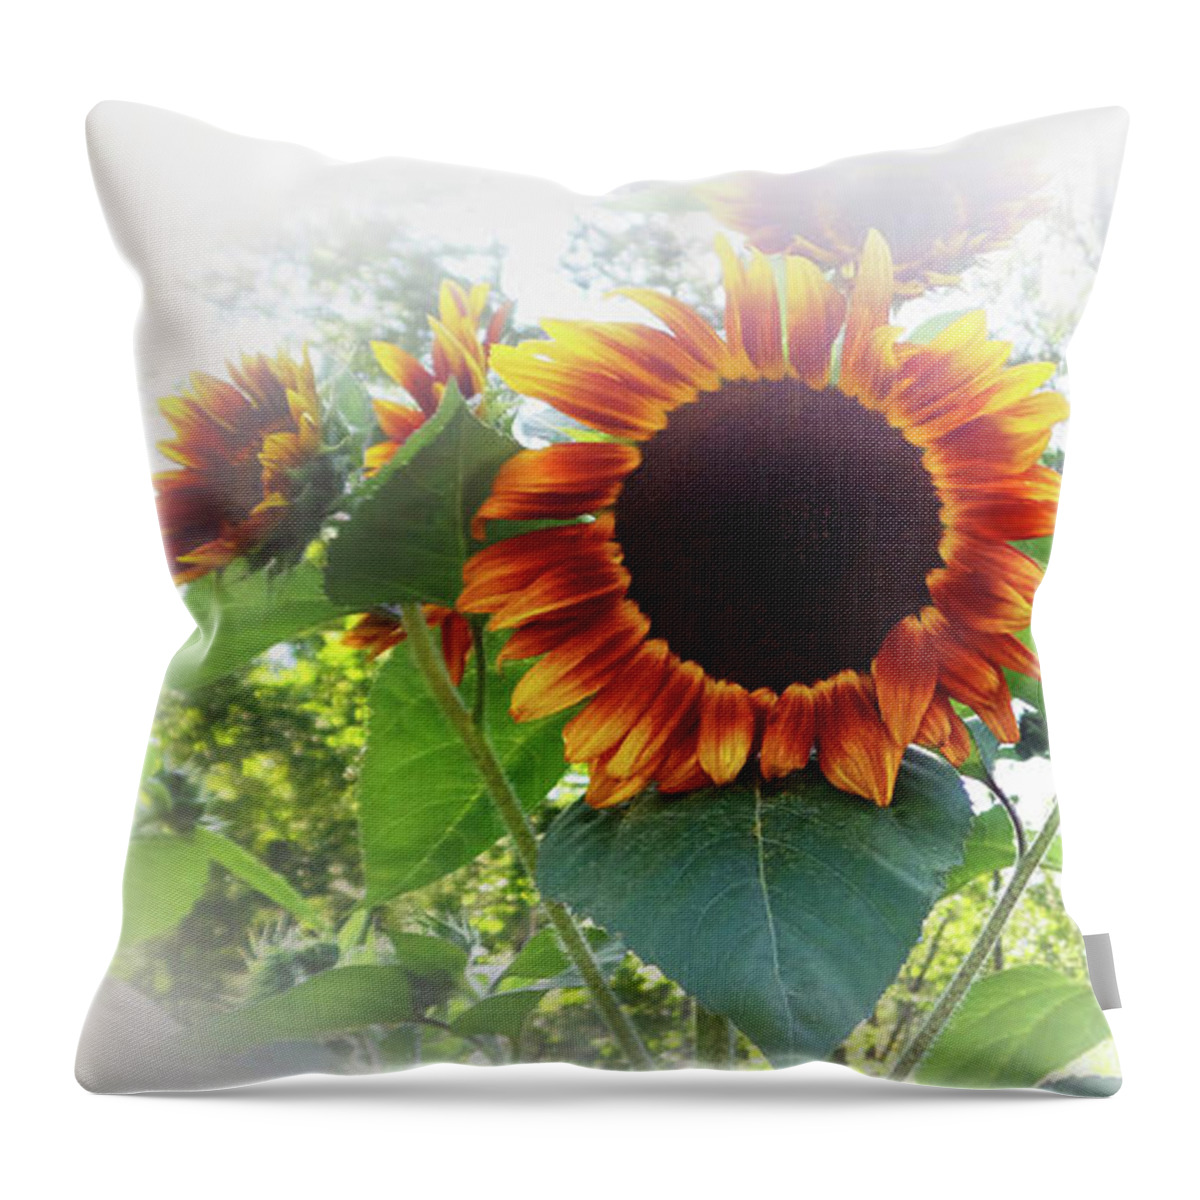 You Are My Sunshine Throw Pillow featuring the photograph You Are My Sunshine by Mike Breau